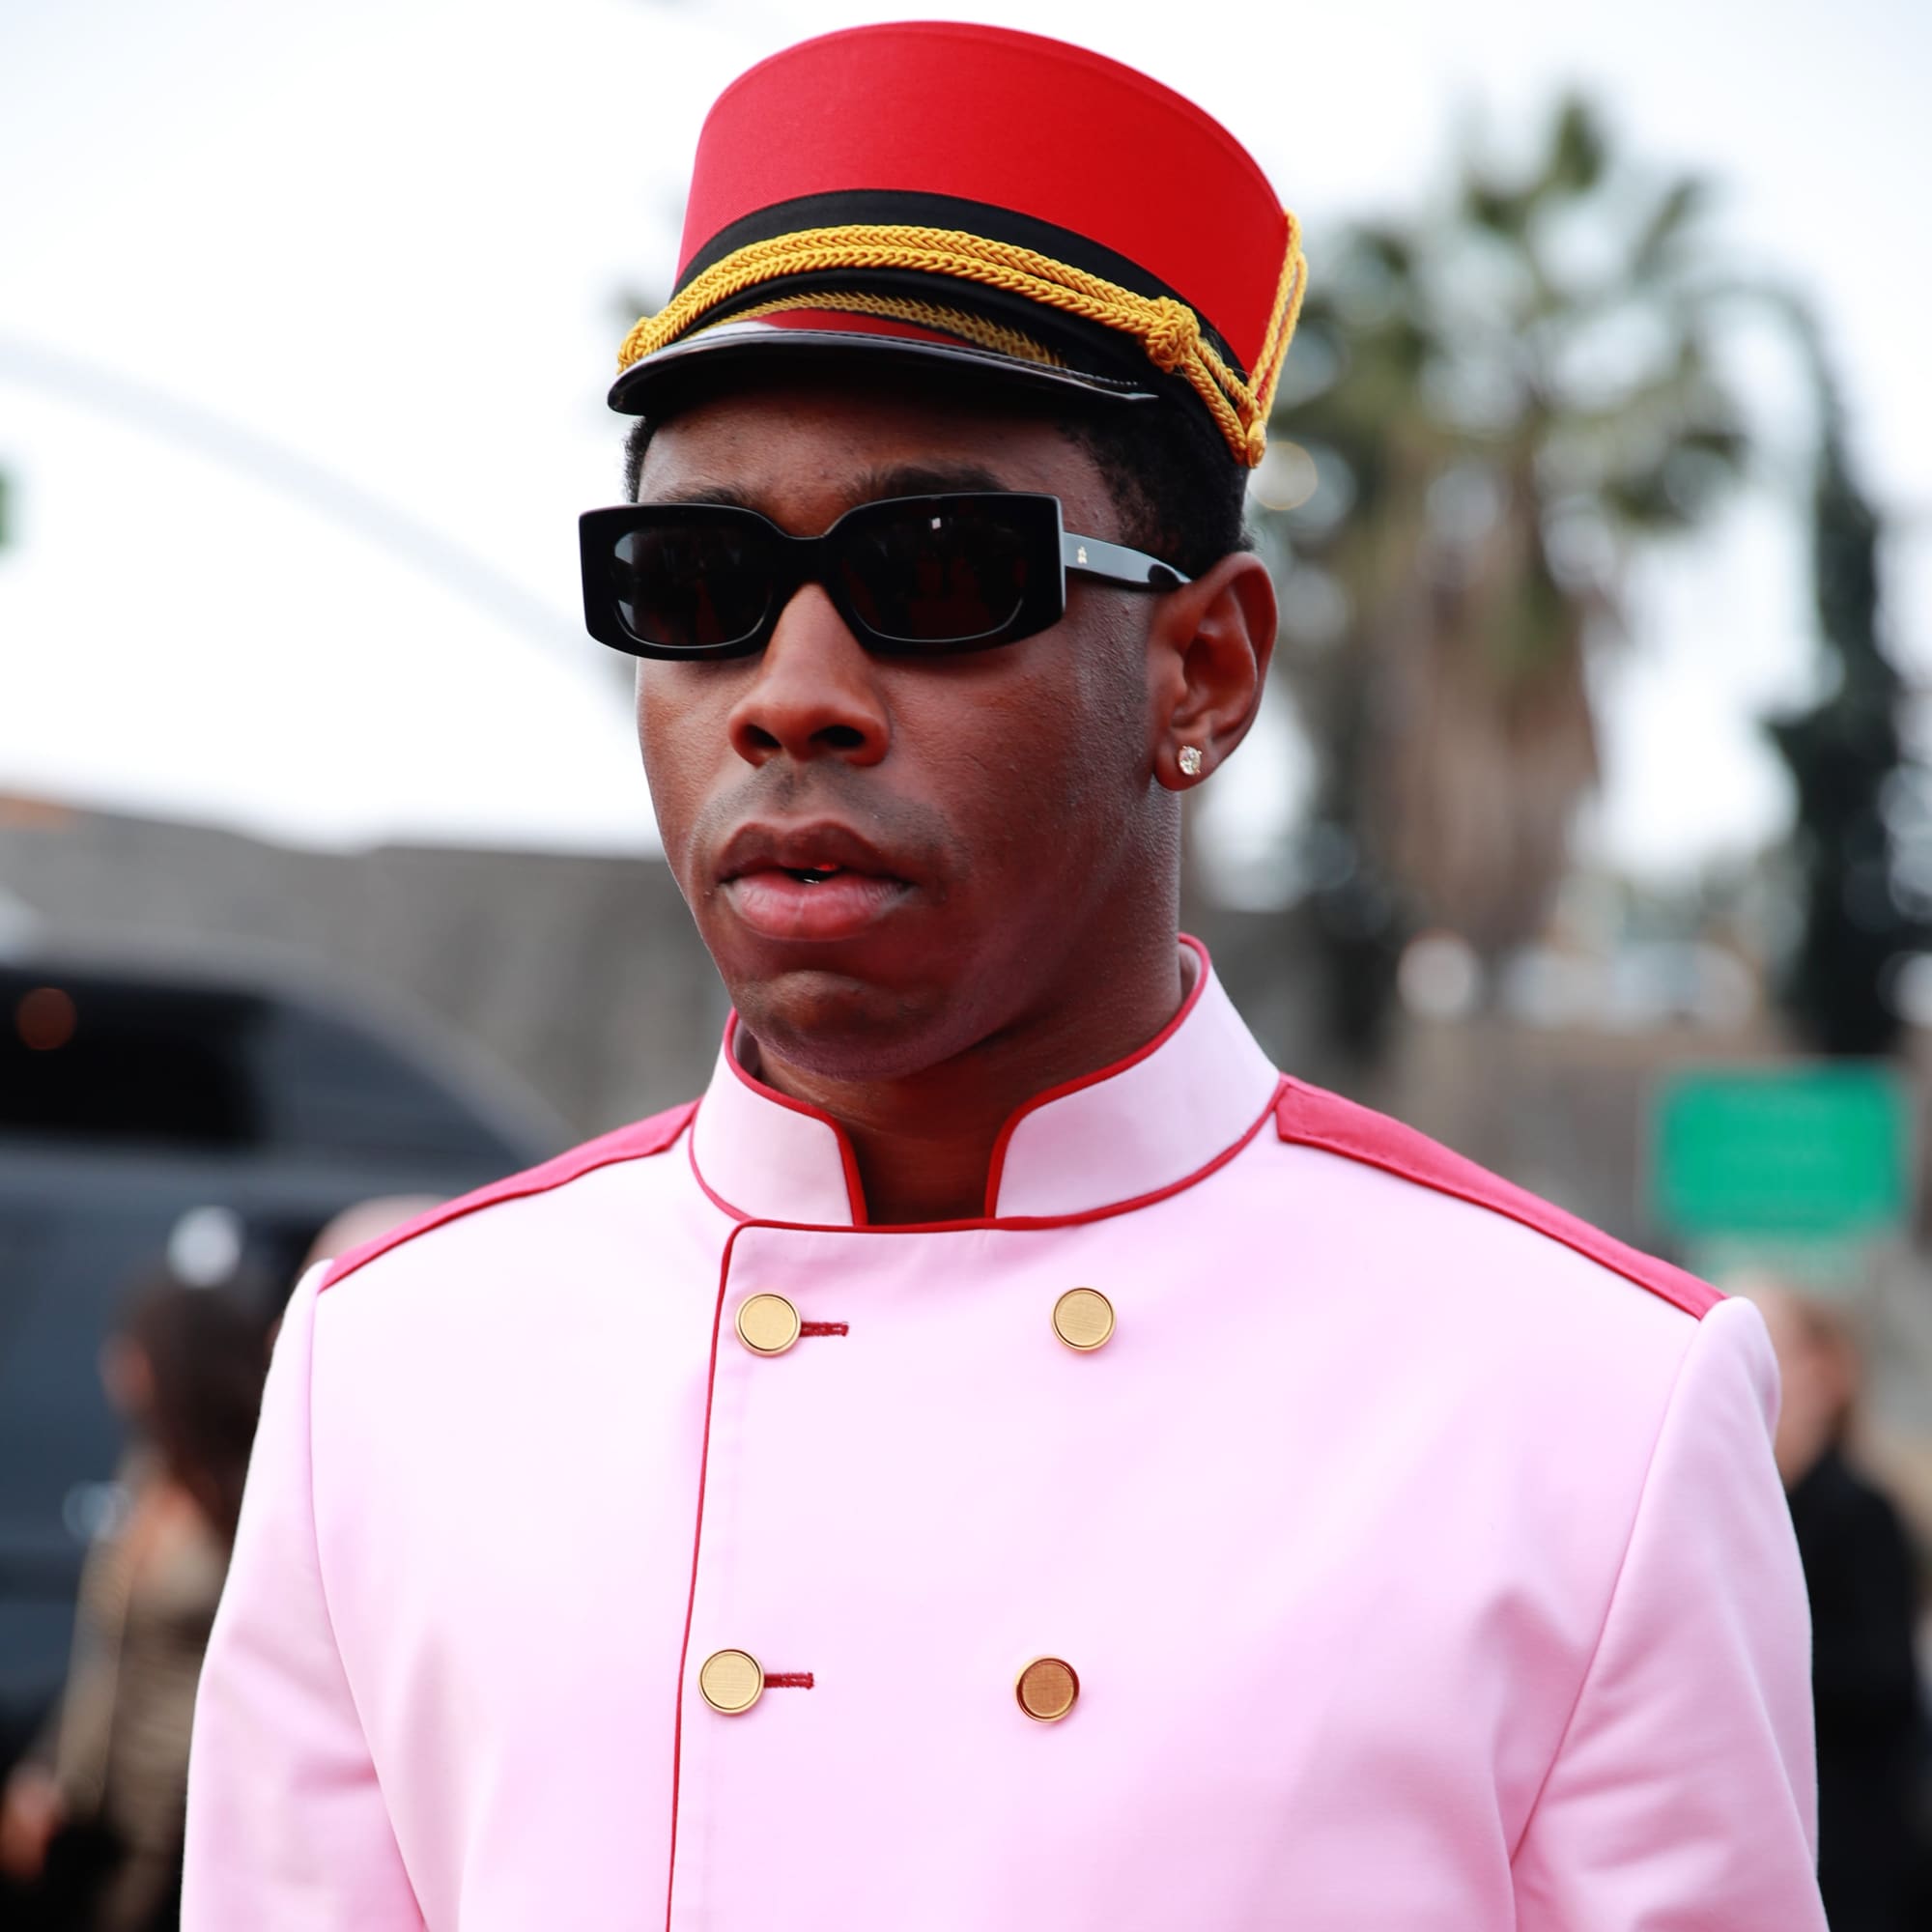 Tyler The Creator's Bellhop Outfit At The 2020 Grammys: See Photos